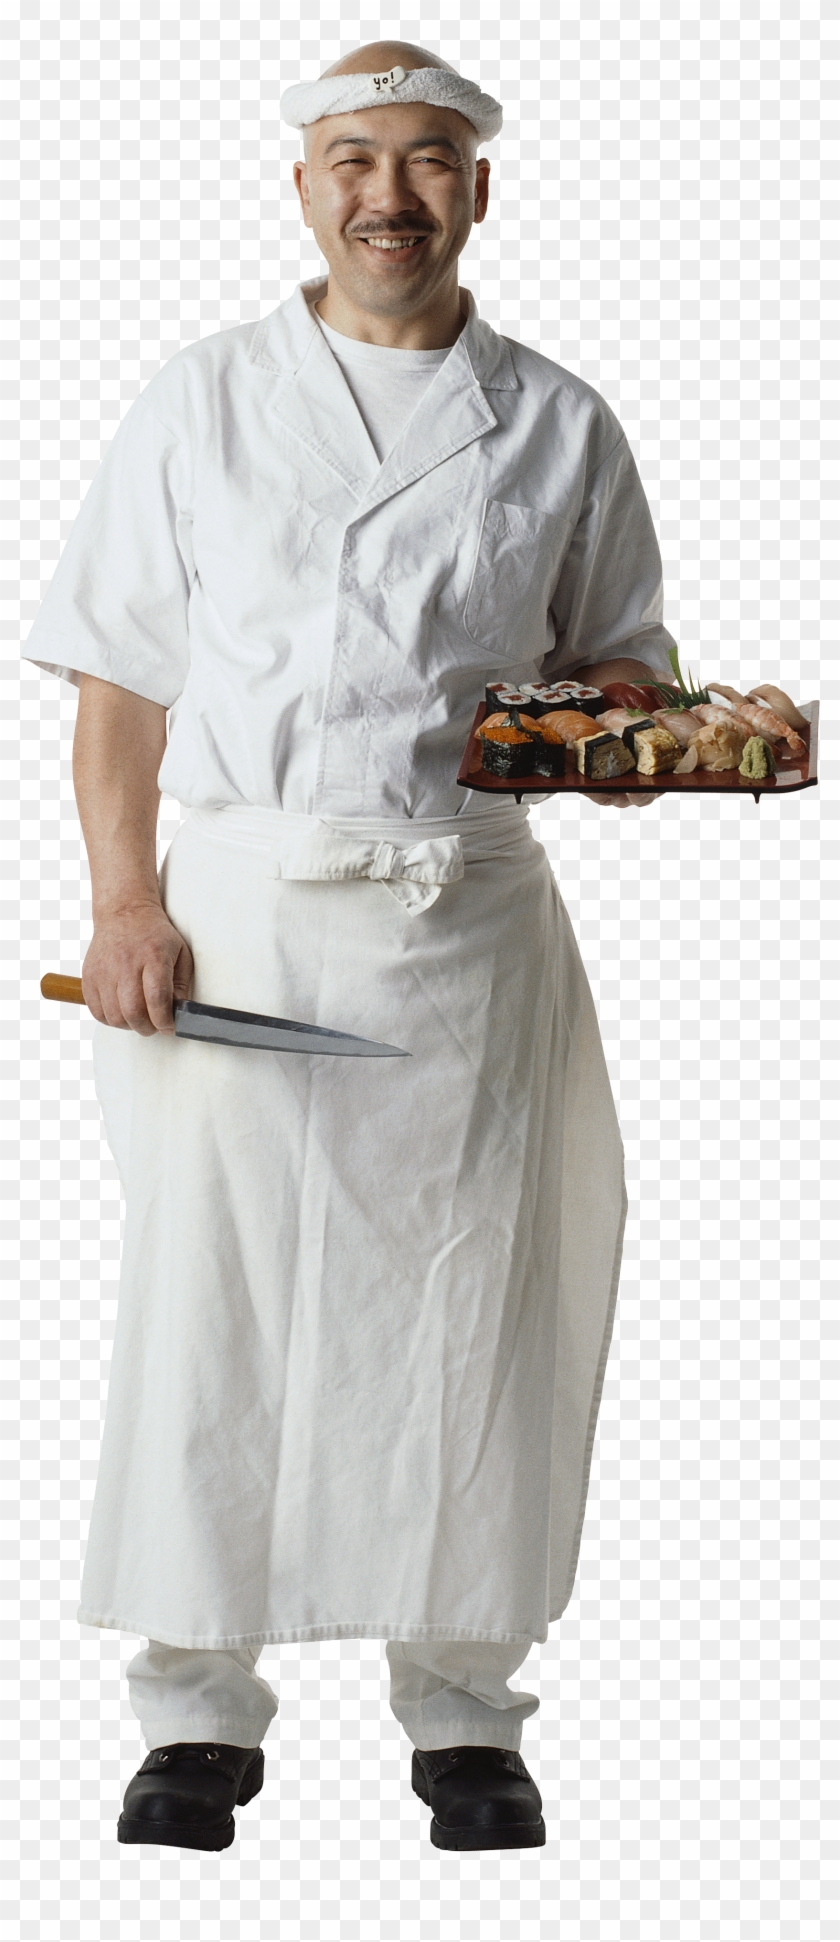 Chef - Sushi Chef Png, Transparent Png - 1675x3794(#5939339) - PngFind